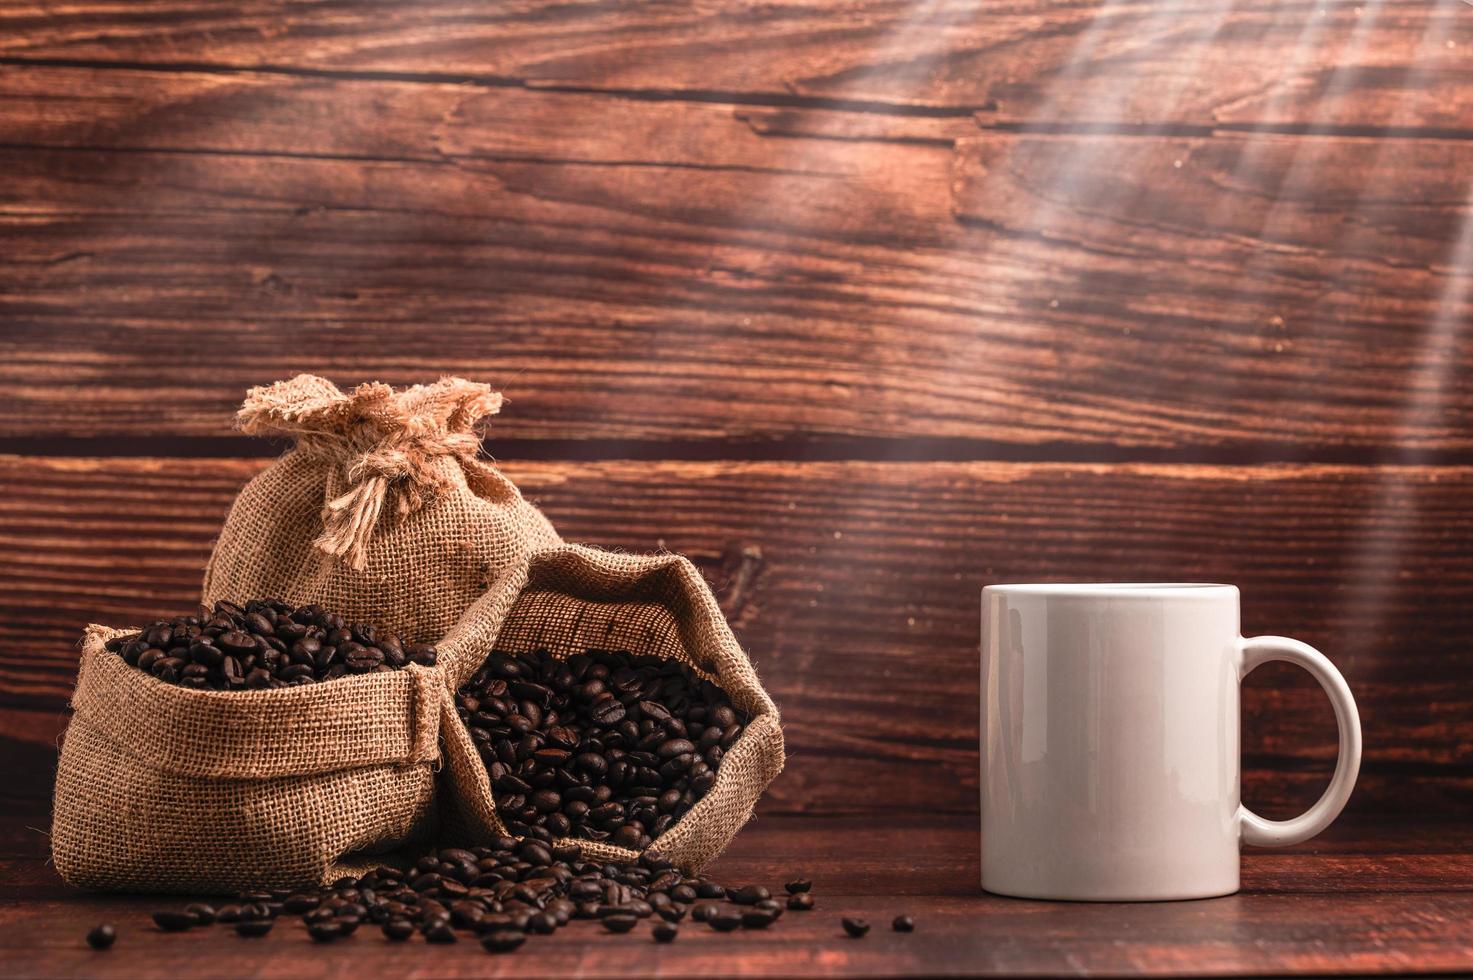 A coffee mug and bags of coffee beans on a wooden table photo